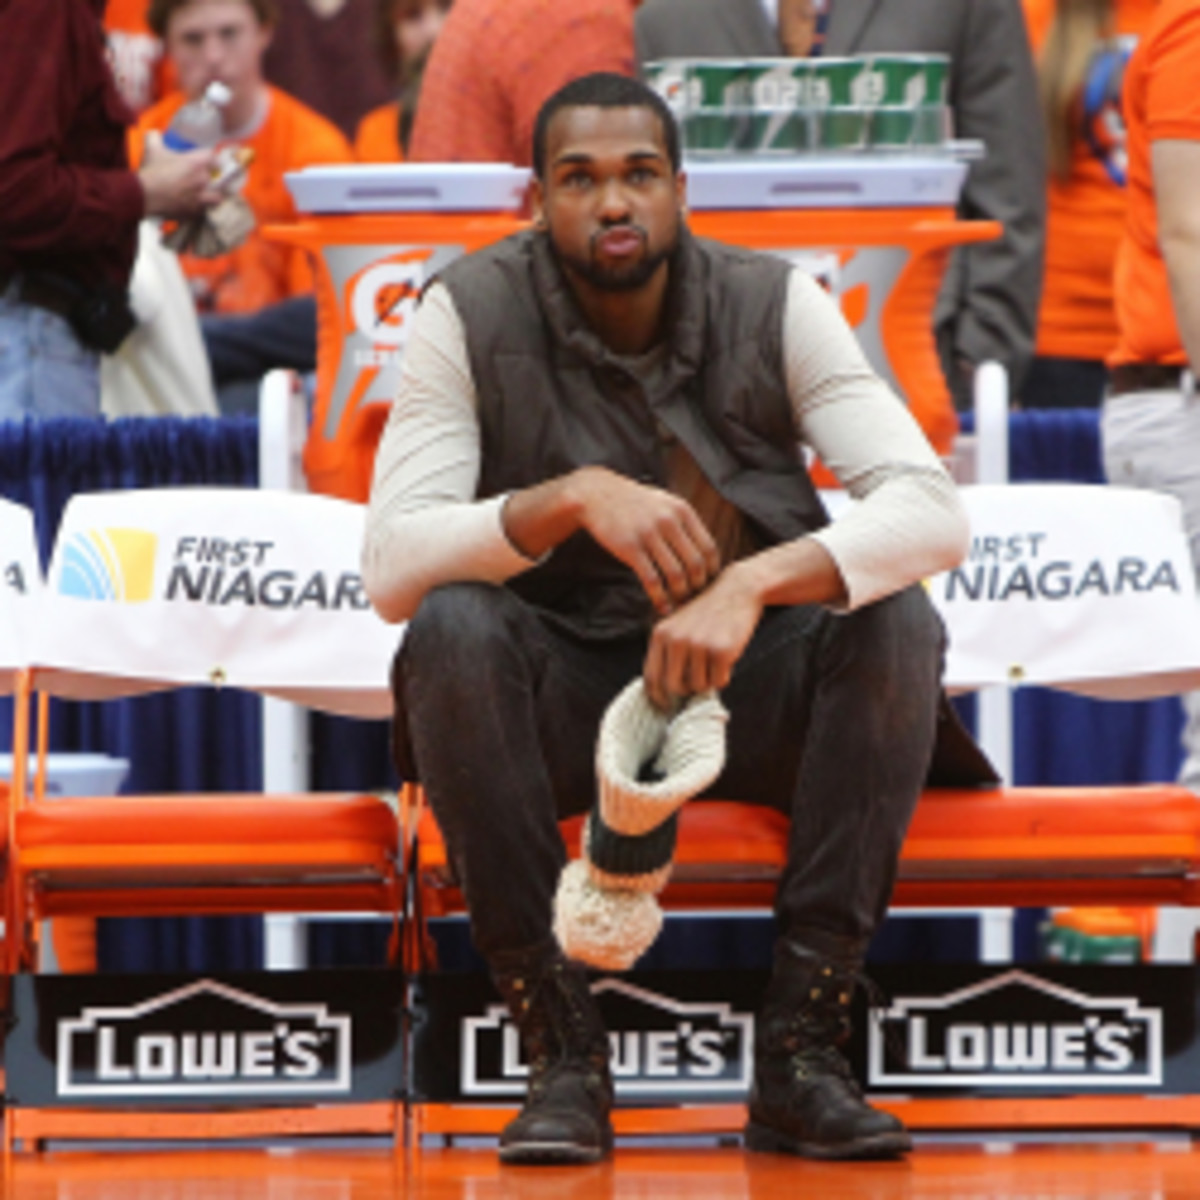 Syracuse forward James Southerland is suspended because of an NCAA investigation into the program's academics. (Nate Shron/Getty Images)